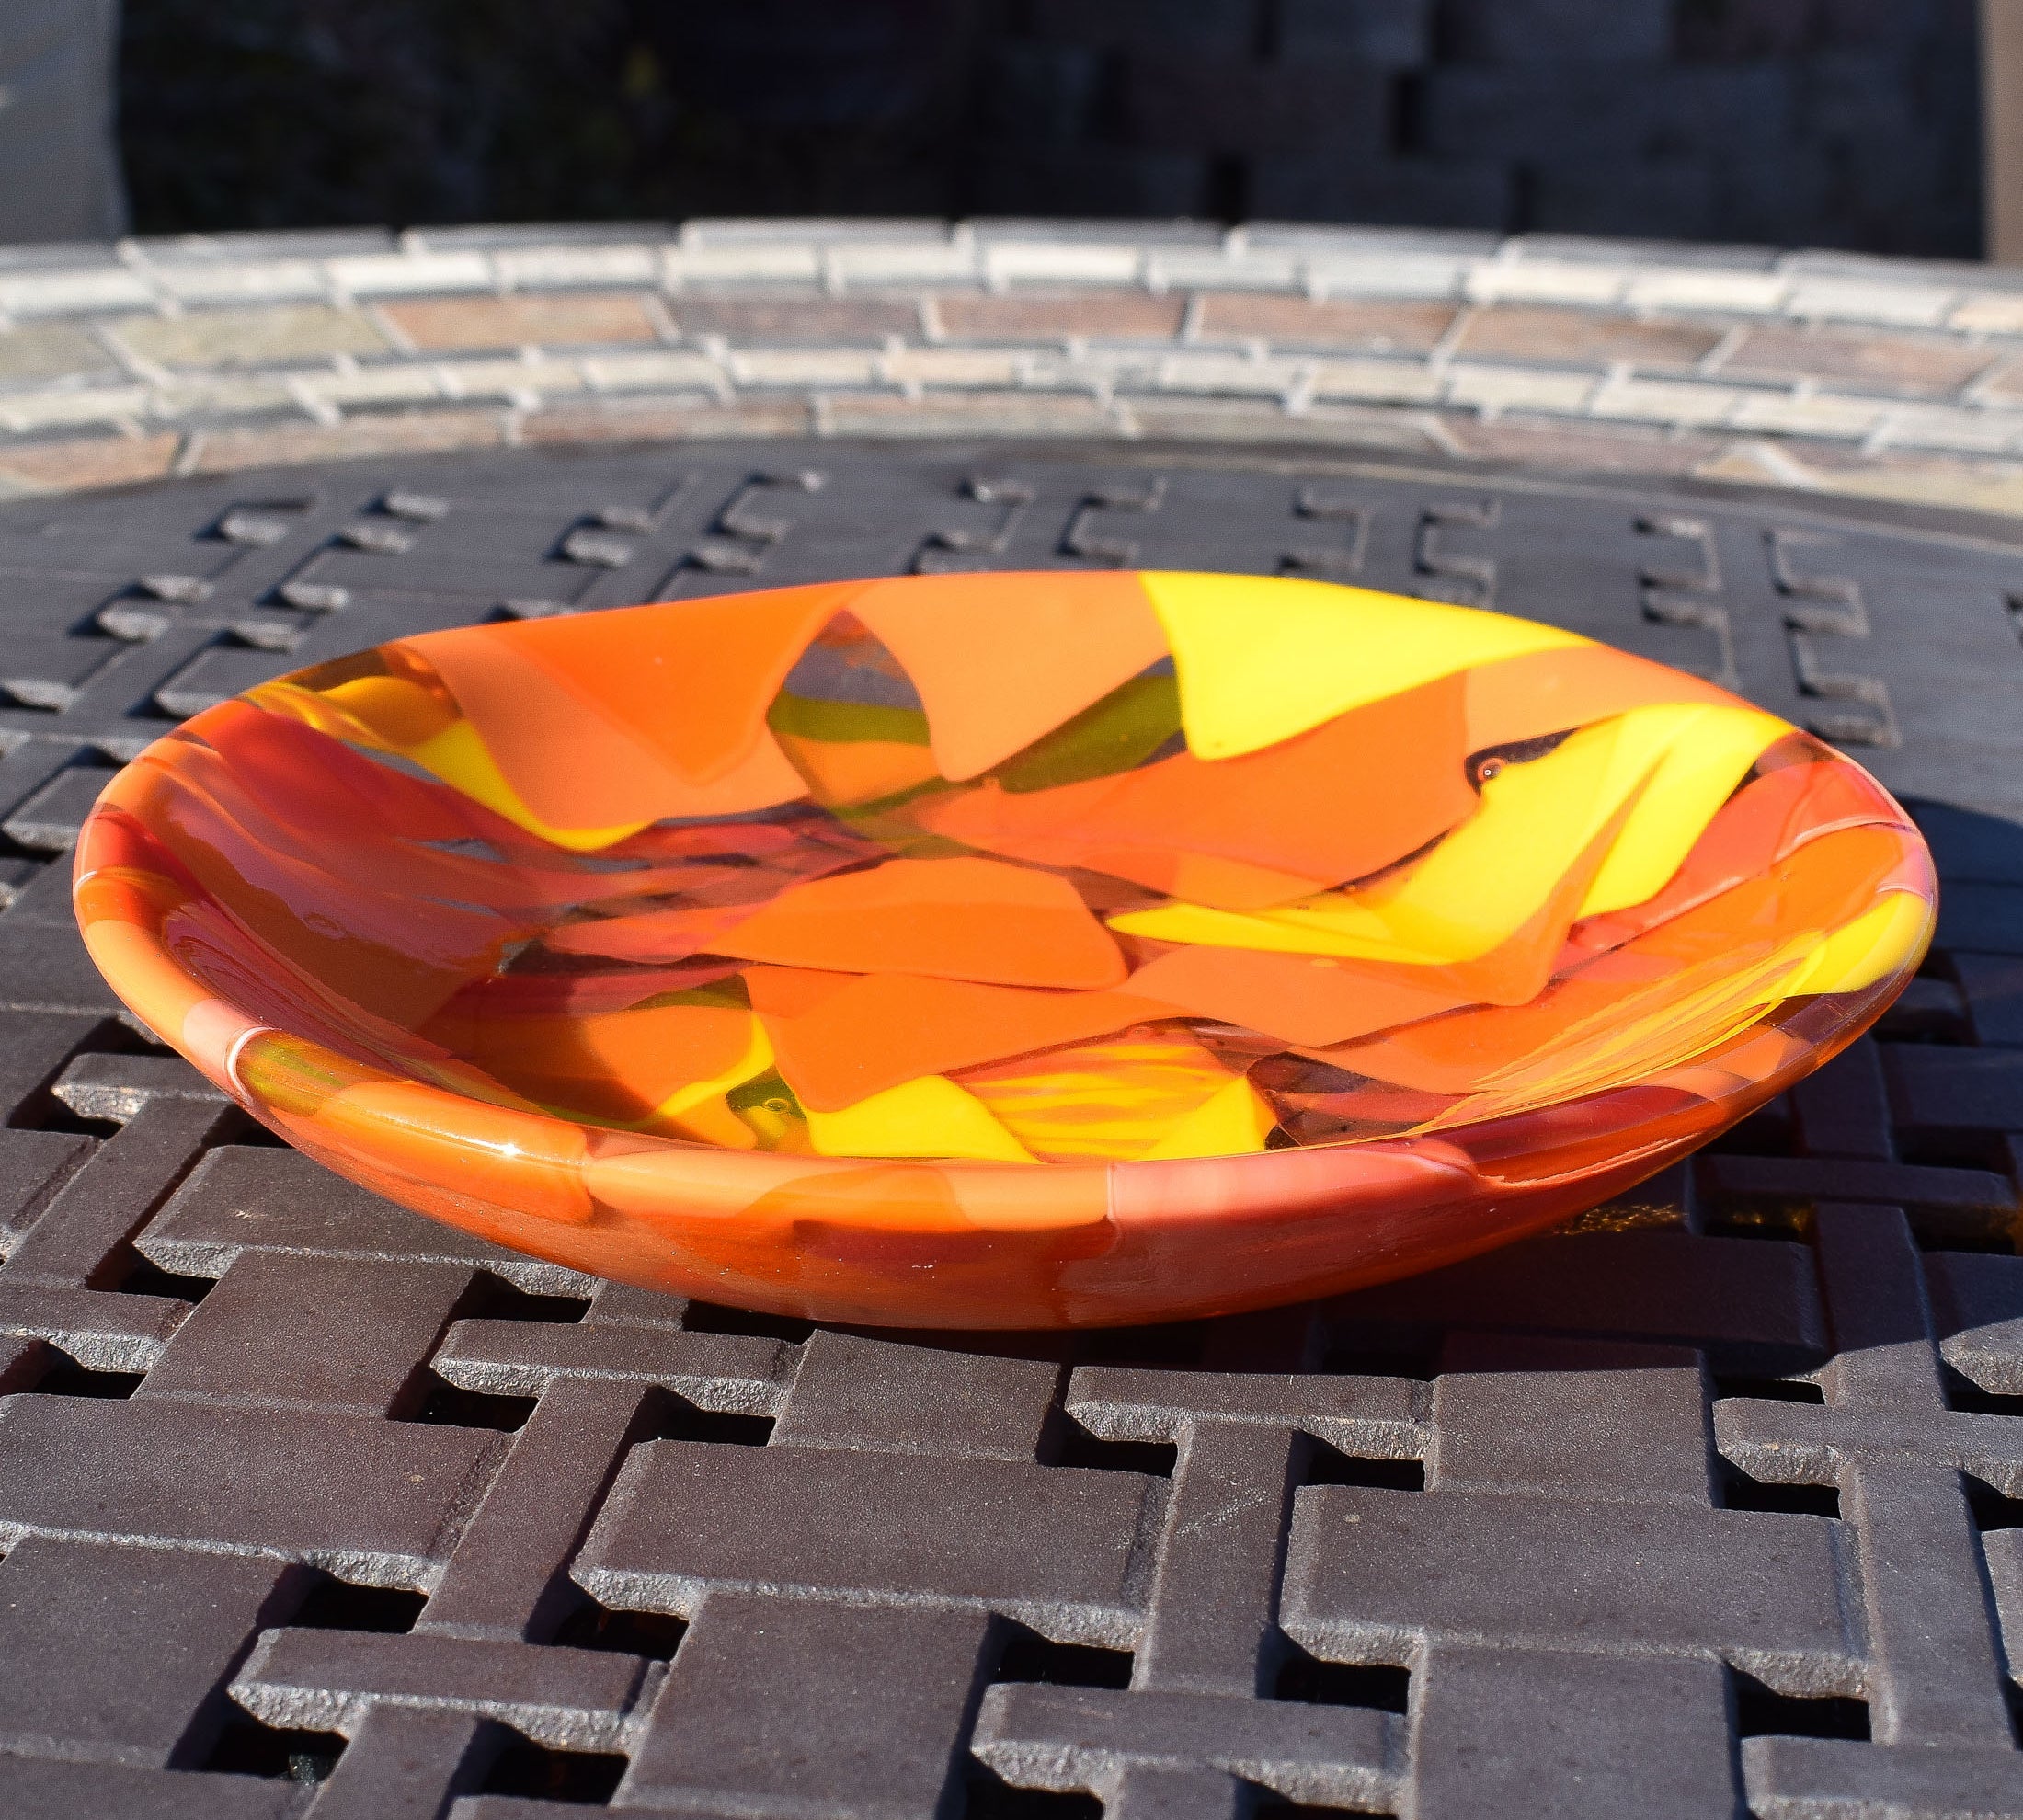 orange and yellow round fused glass bowl on metal grid